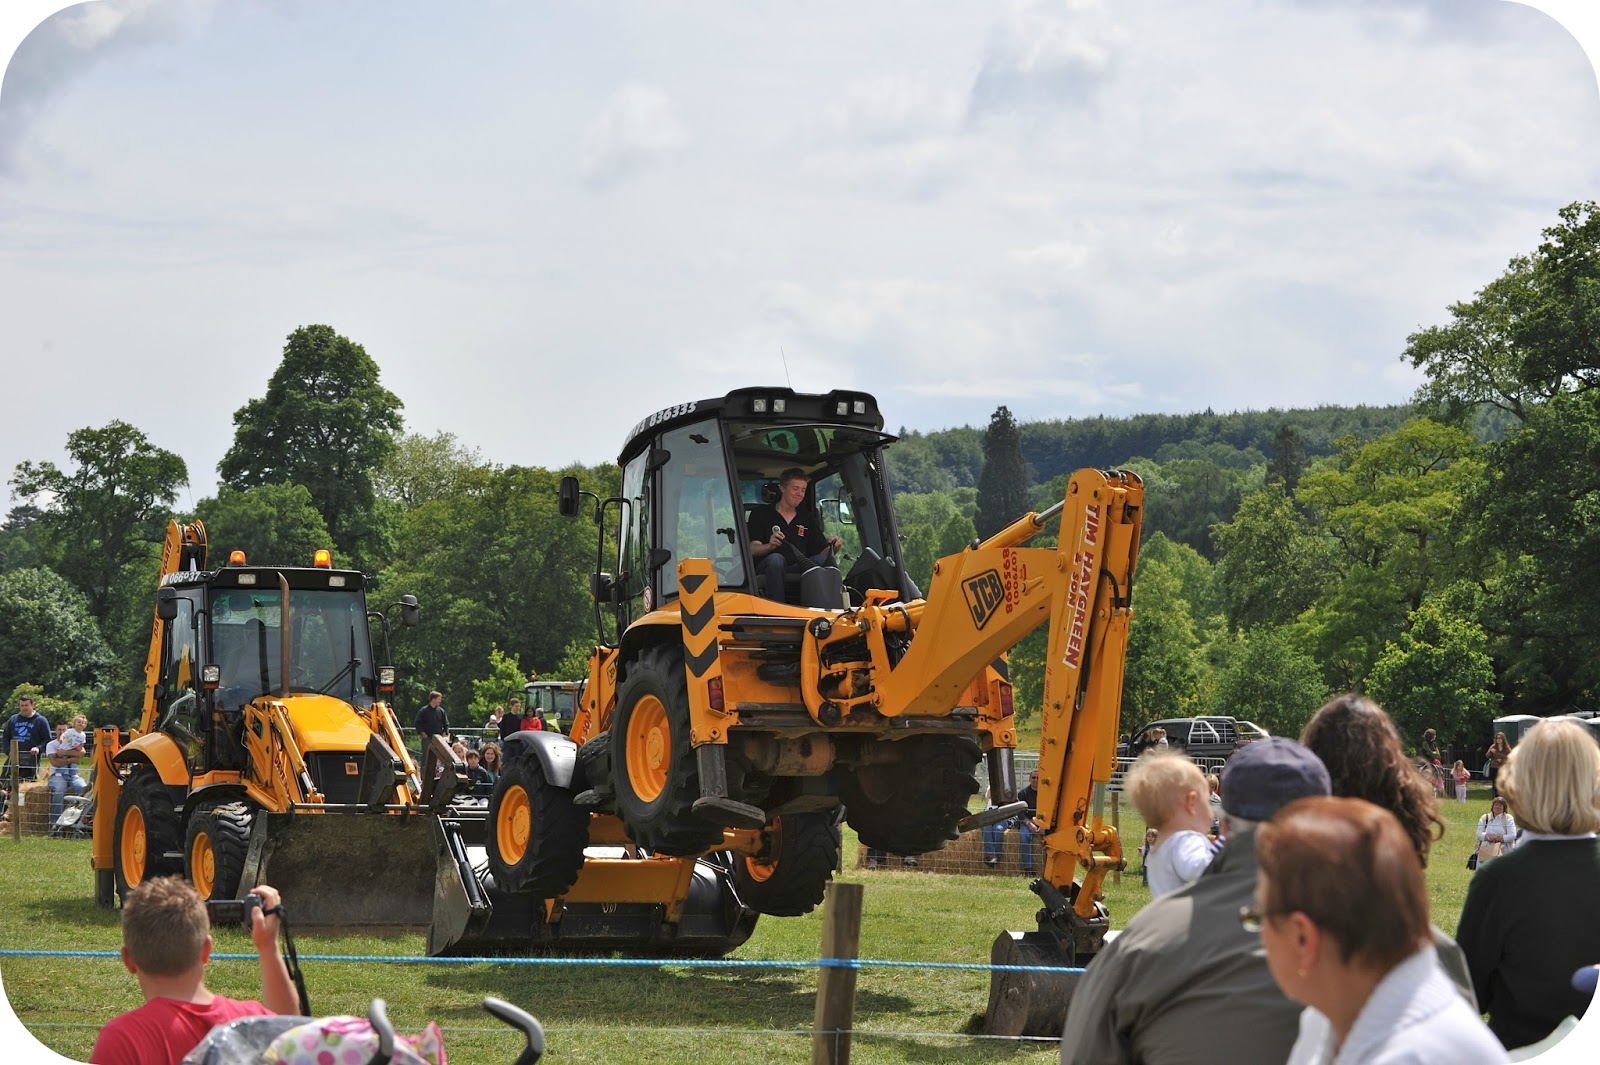 Win a Family Ticket to Tractor Ted's Big Machines Weekend at Bowood House